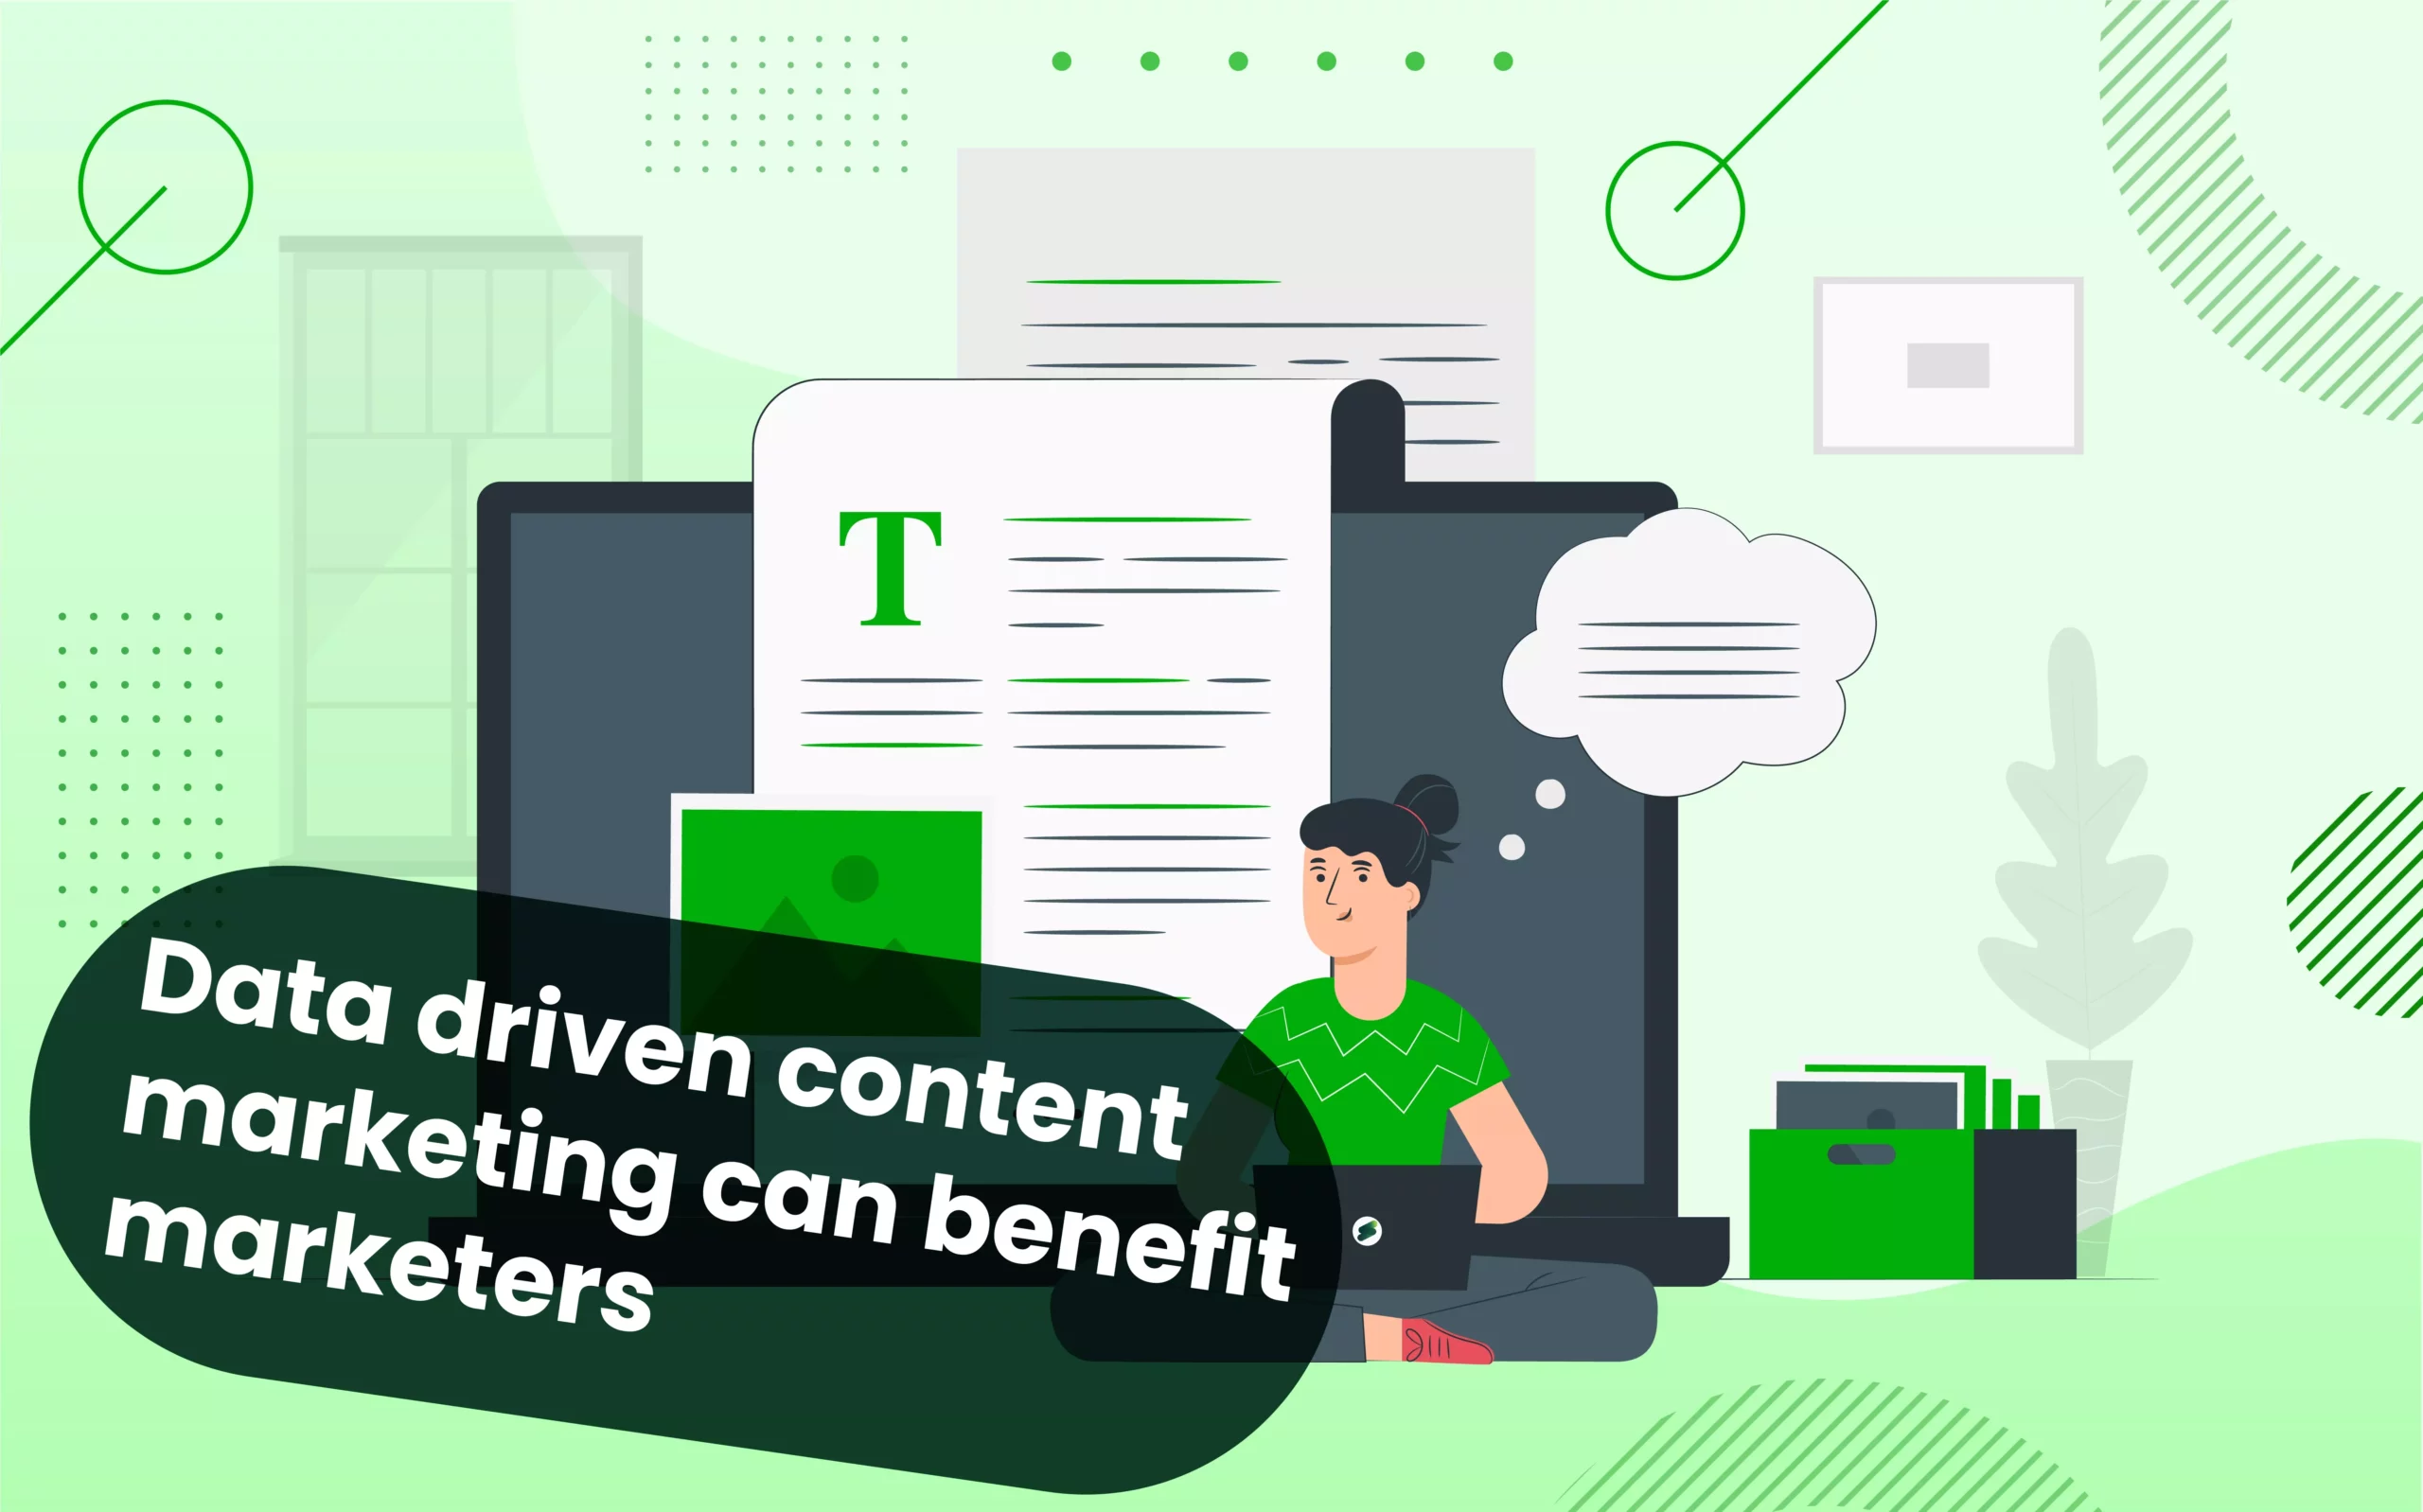 Data driven content marketing can benefit marketers